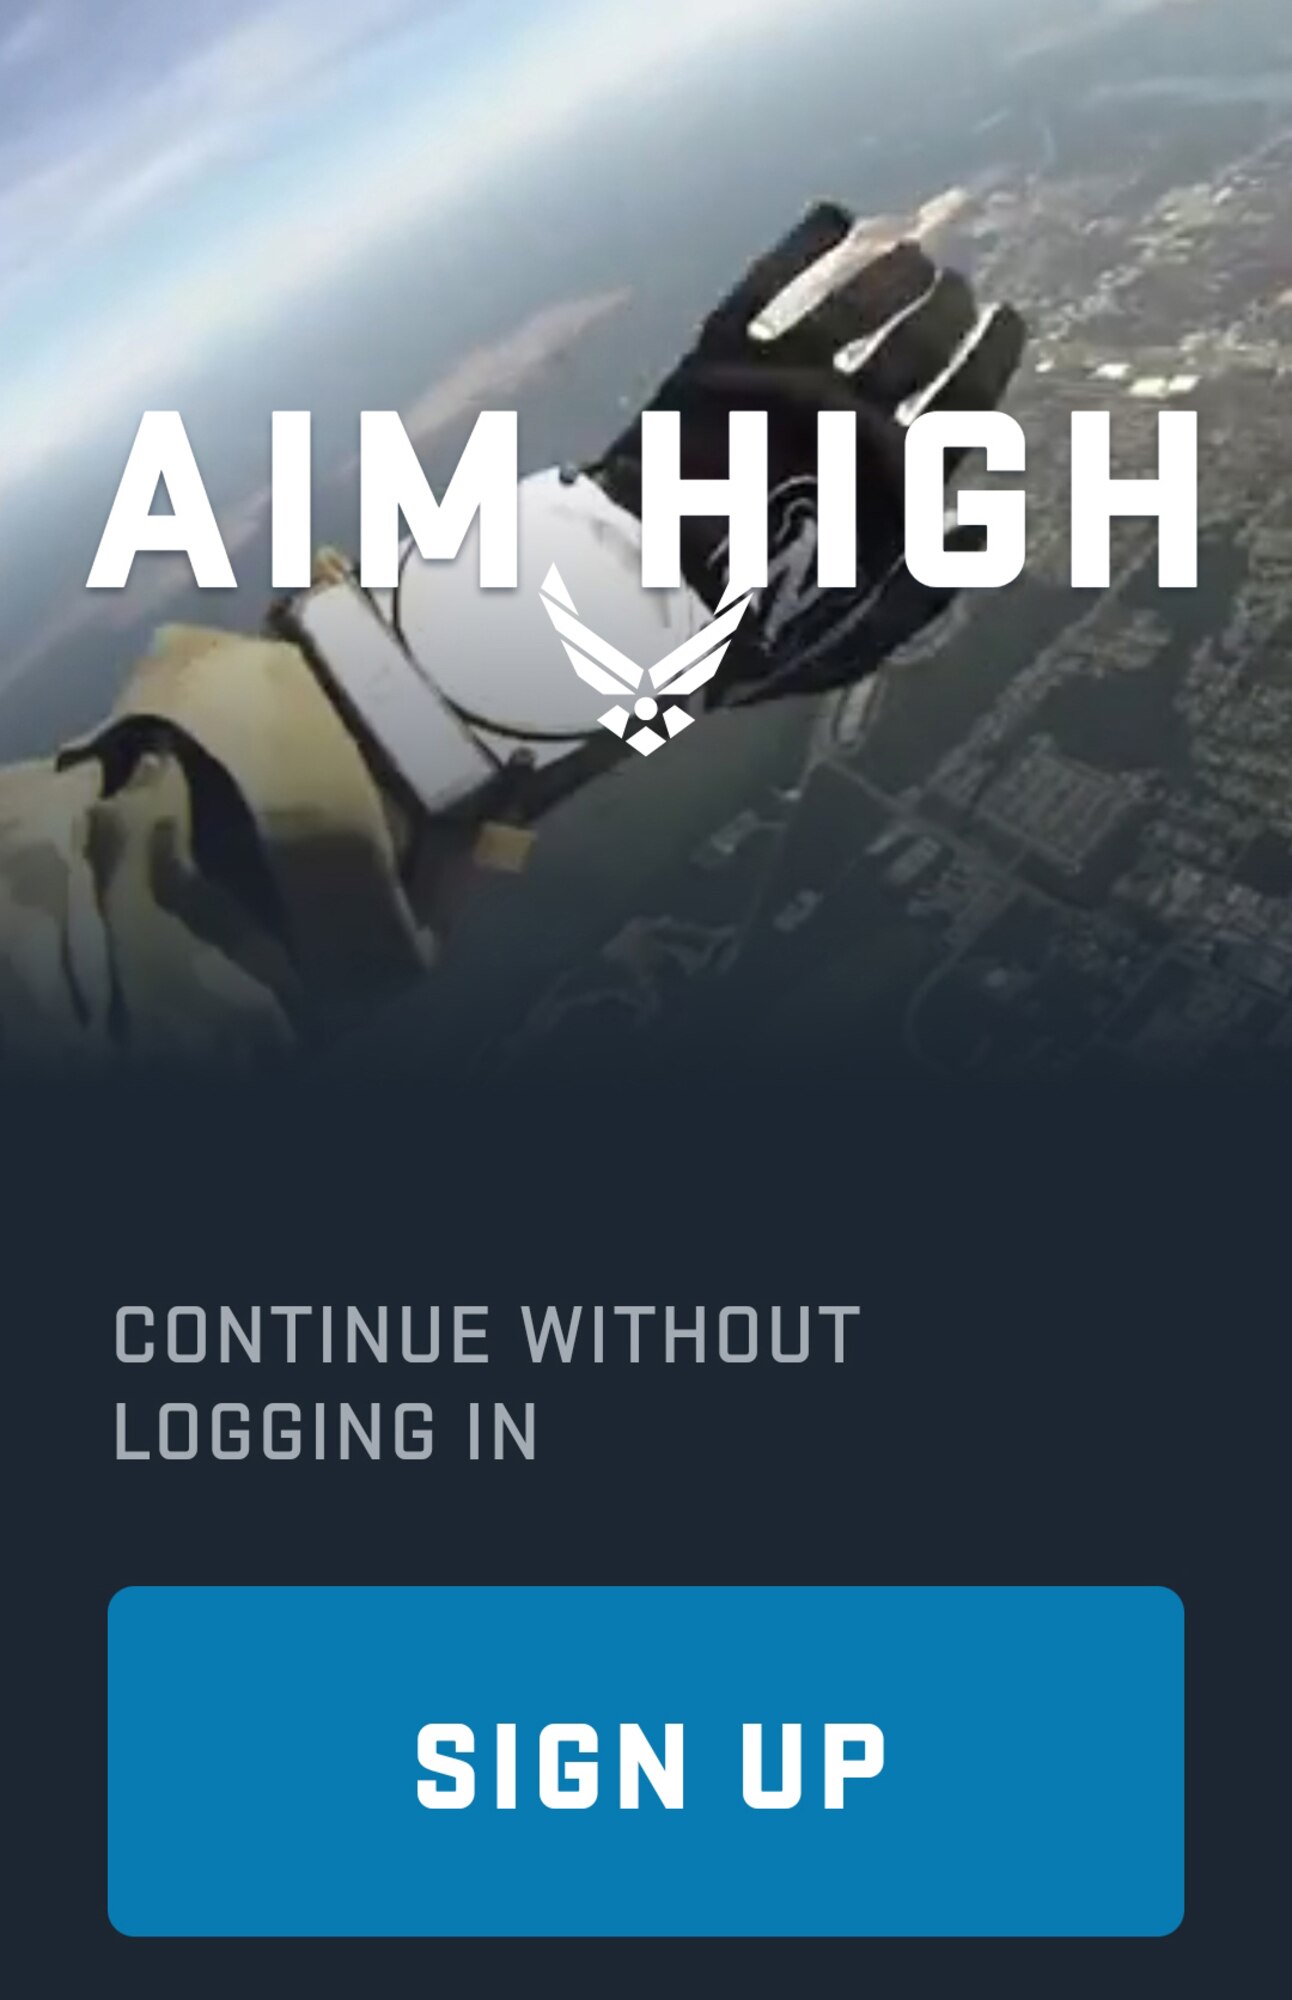 The Aim High app is available on both the Android and Apple operating systems, and can be used with or without a login in. (U.S. Air Force photo by Jessica Kendziorek)